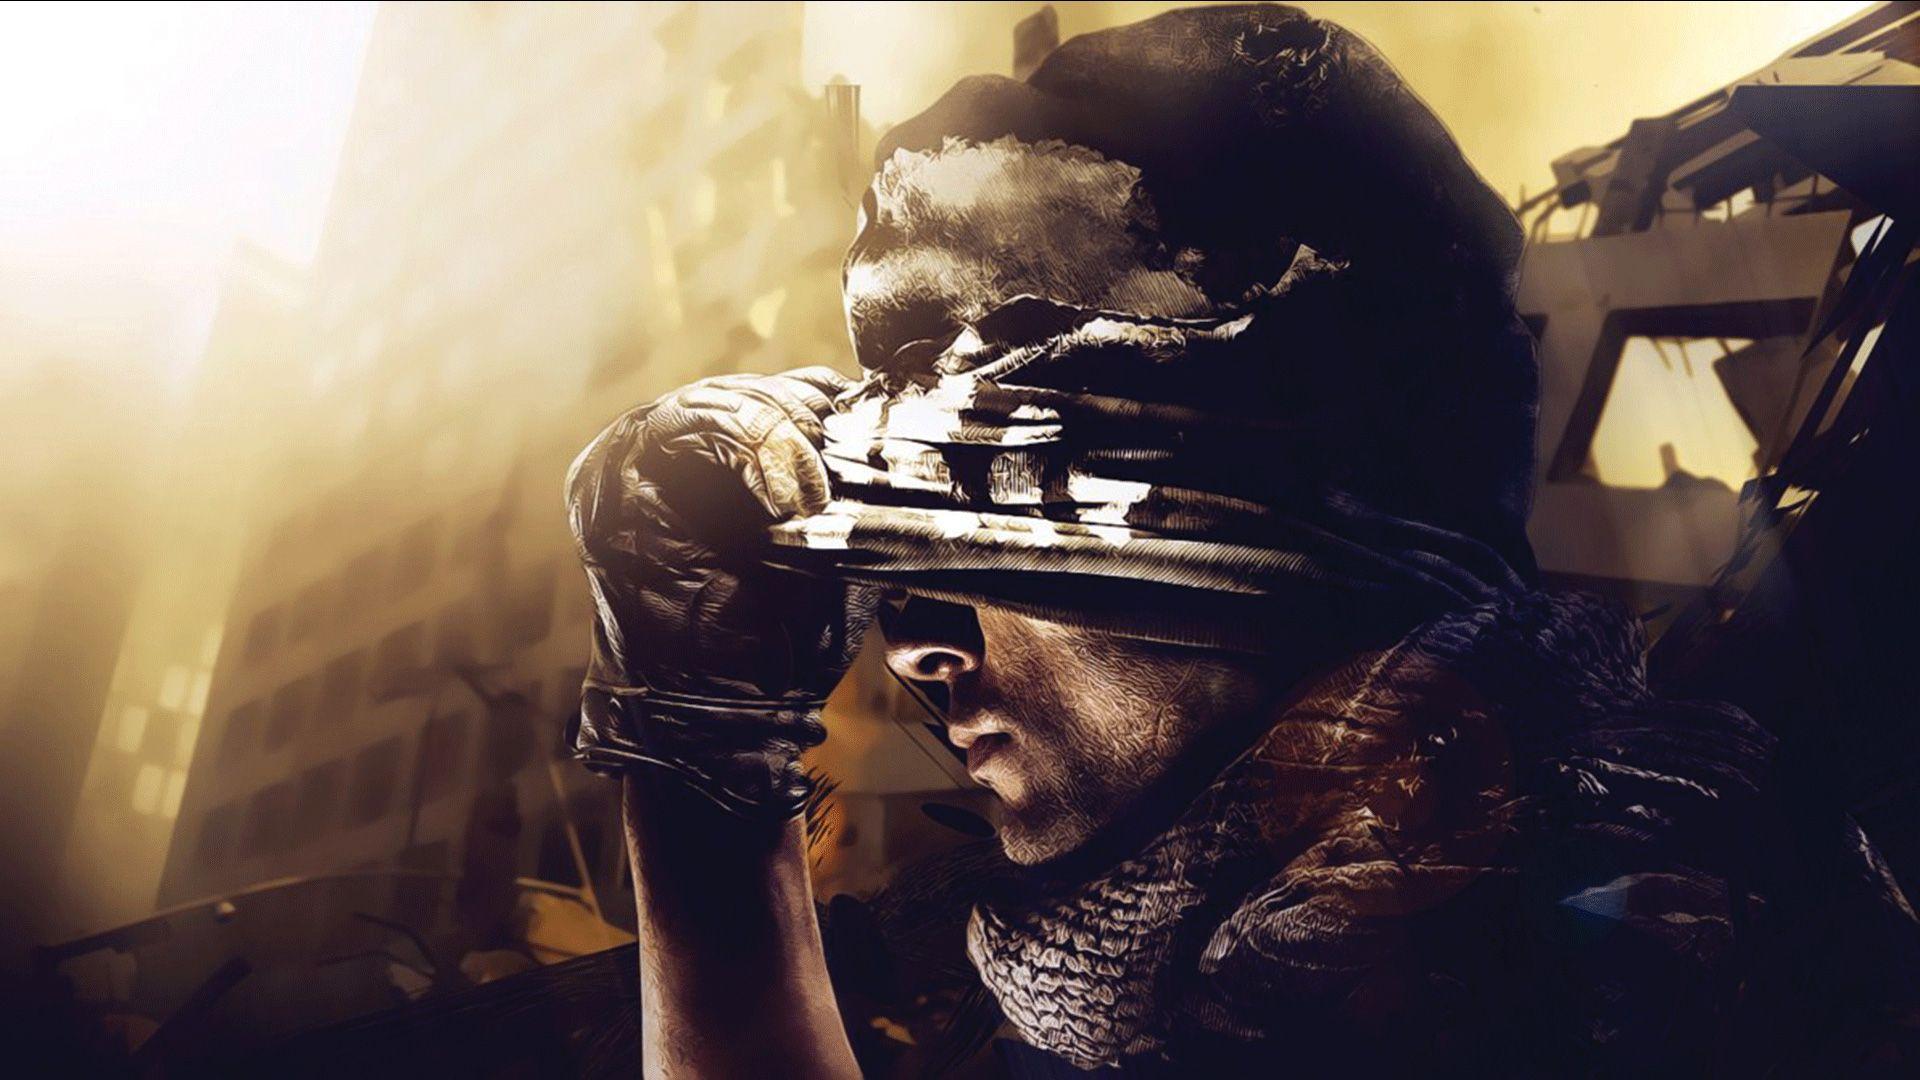 Awesome Call Of Duty Ghosts Wallpaper 20774 1920x1080 px